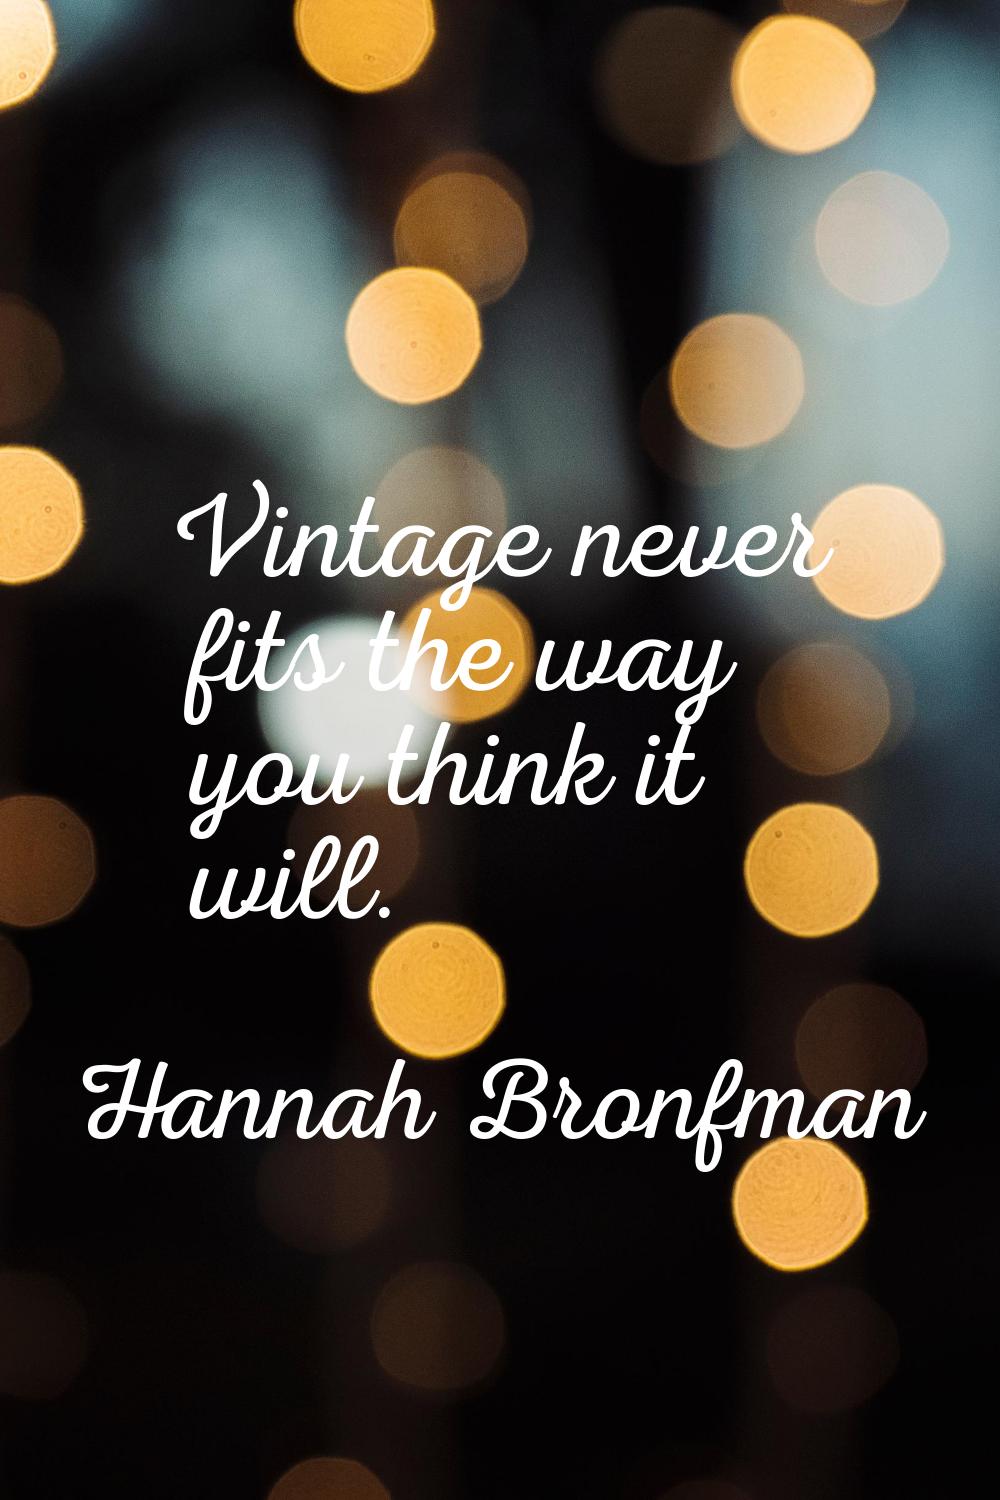 Vintage never fits the way you think it will.